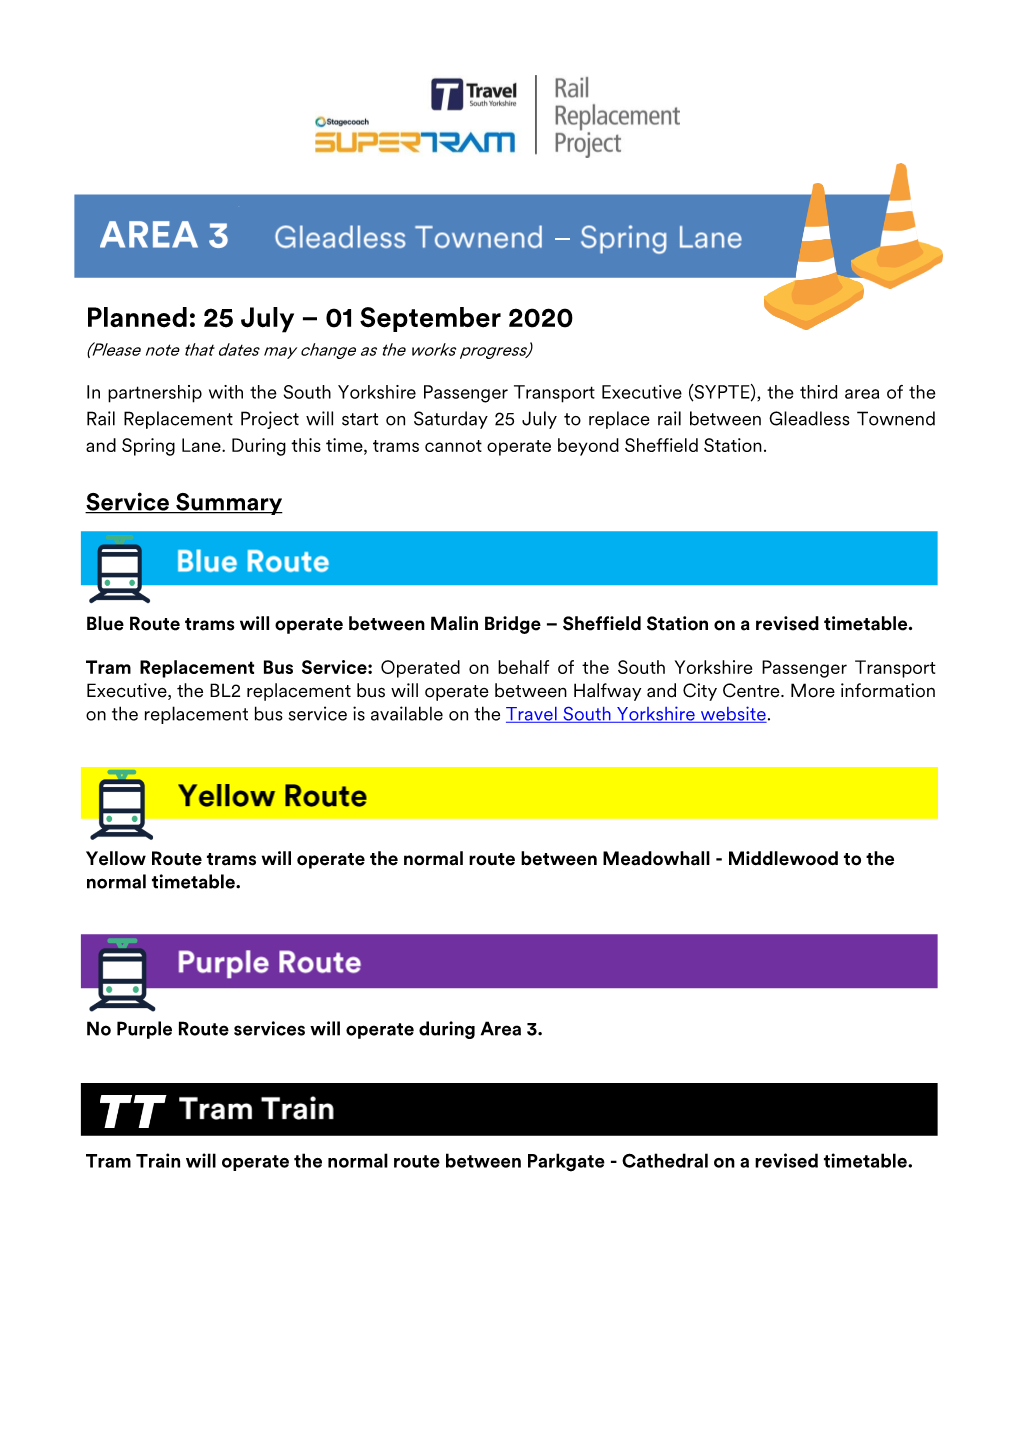 01 September 2020 (Please Note That Dates May Change As the Works Progress)